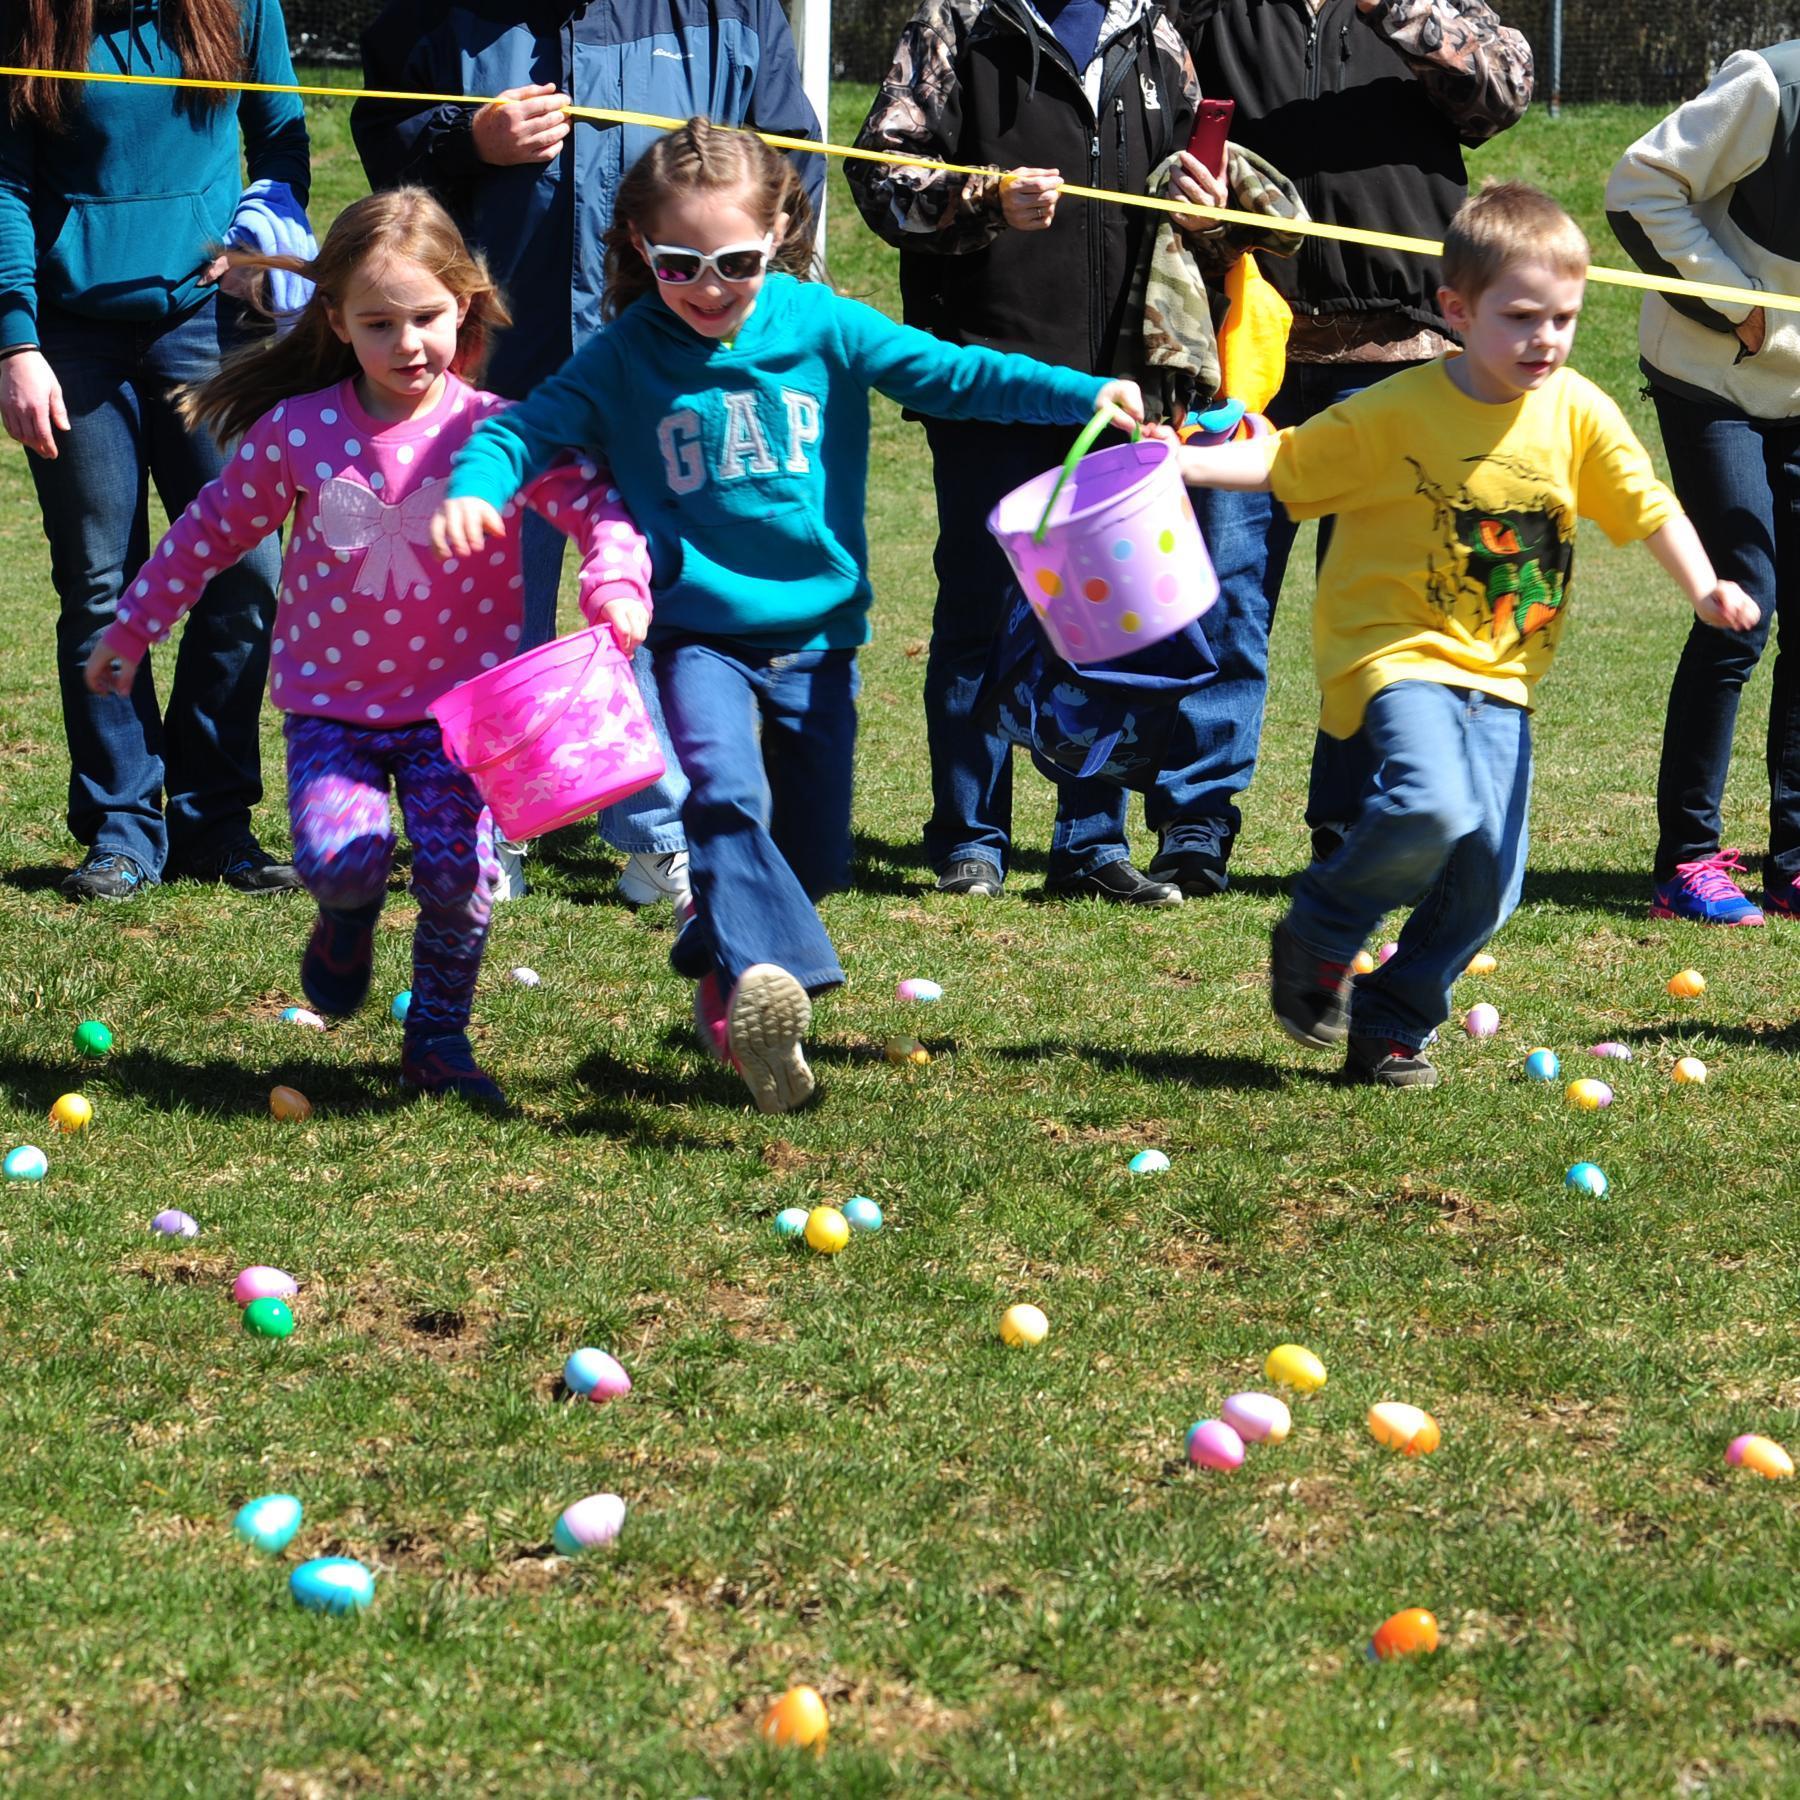 Easter events in the Lehigh Valley area: Egg hunts, breakfast with the